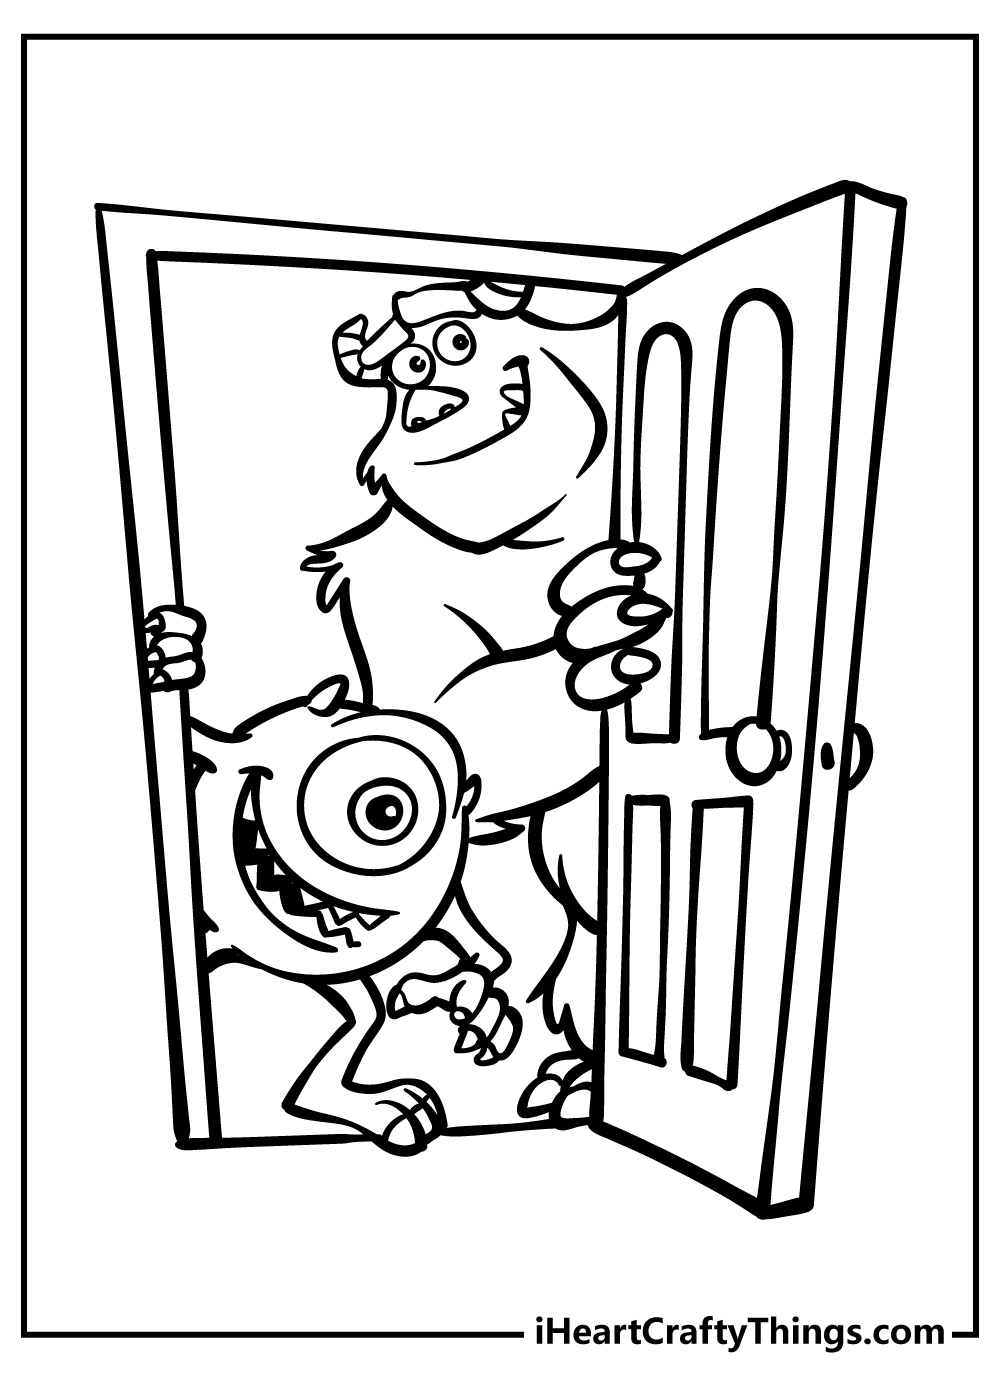 Printable Monsters Inc. Coloring Pages Updated 20